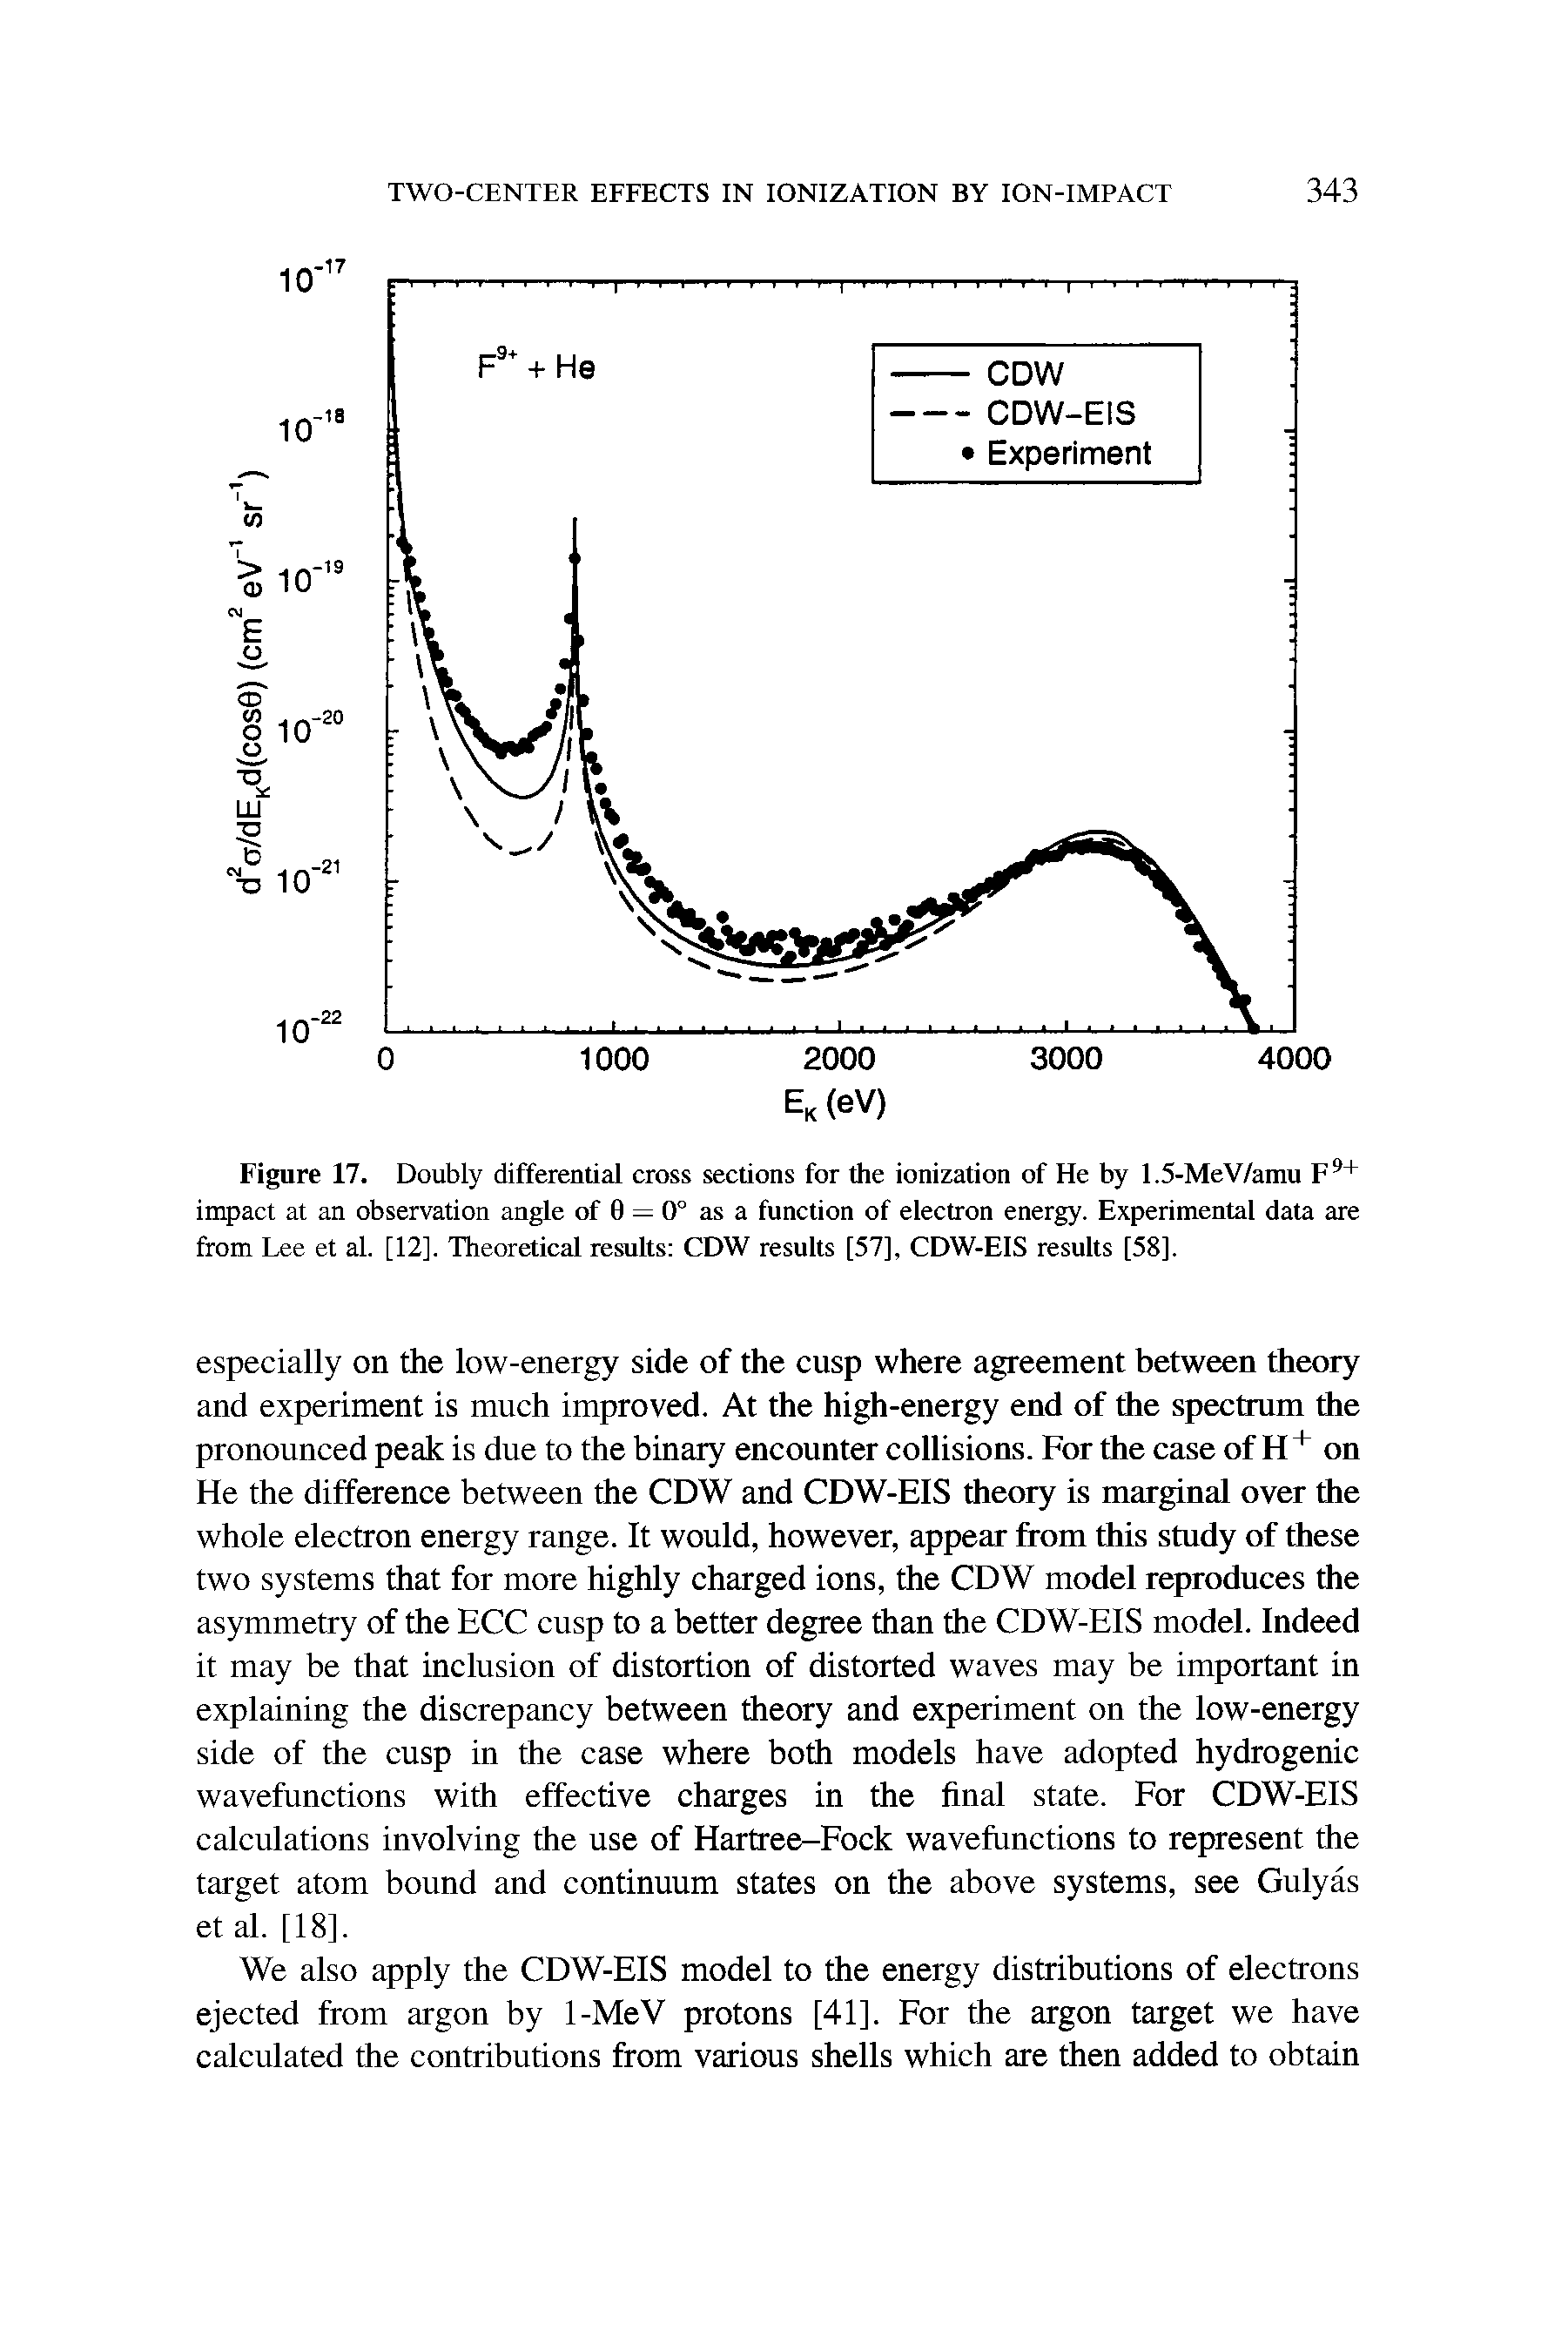 Figure 17. Doubly differential cross sections for the ionization of He by 1.5-MeV/amu F9+ impact at an observation angle of 0 — 0" as a function of electron energy. Experimental data are from Lee et al. [12]. Theoretical results CDW results [57], CDW-EIS results [58].